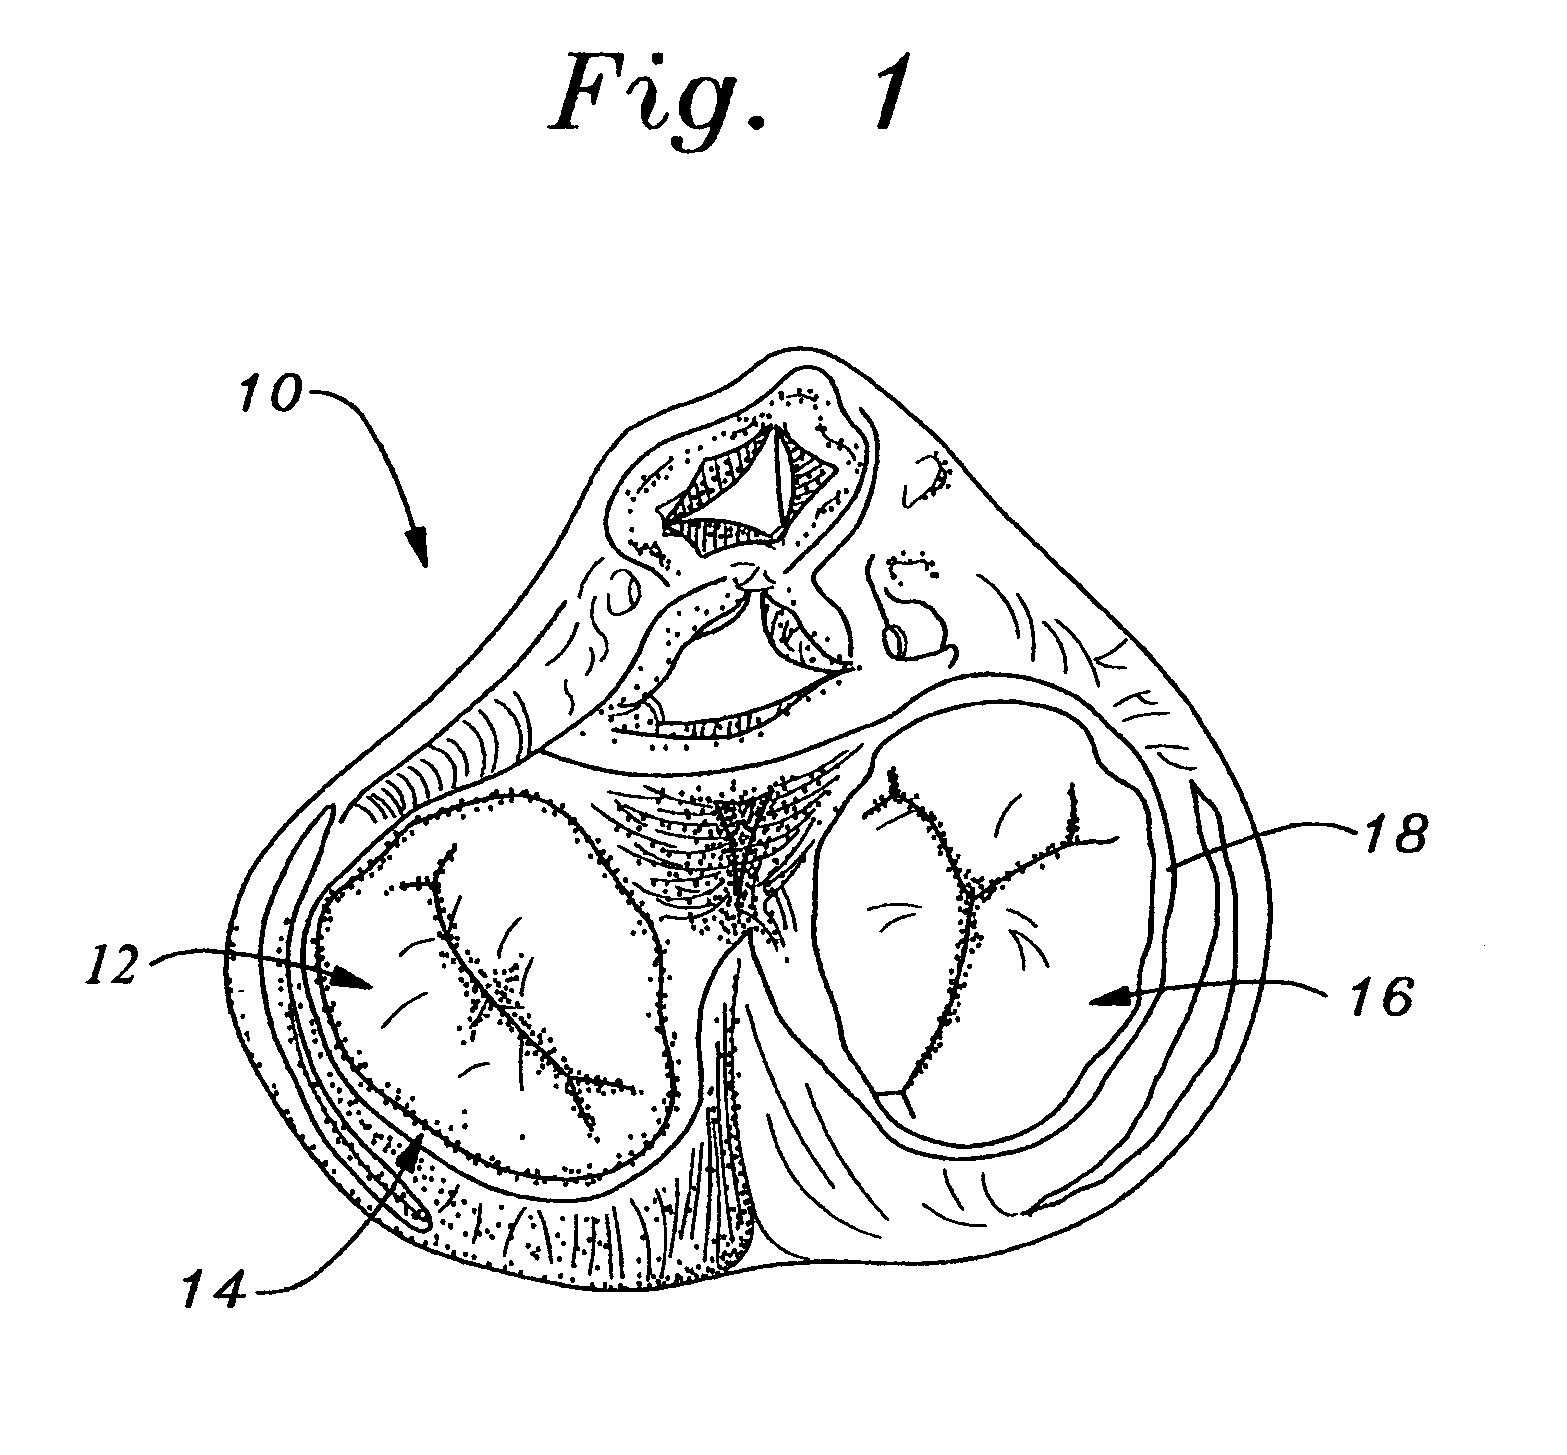 Method of implanting a self-molding annuloplasty ring